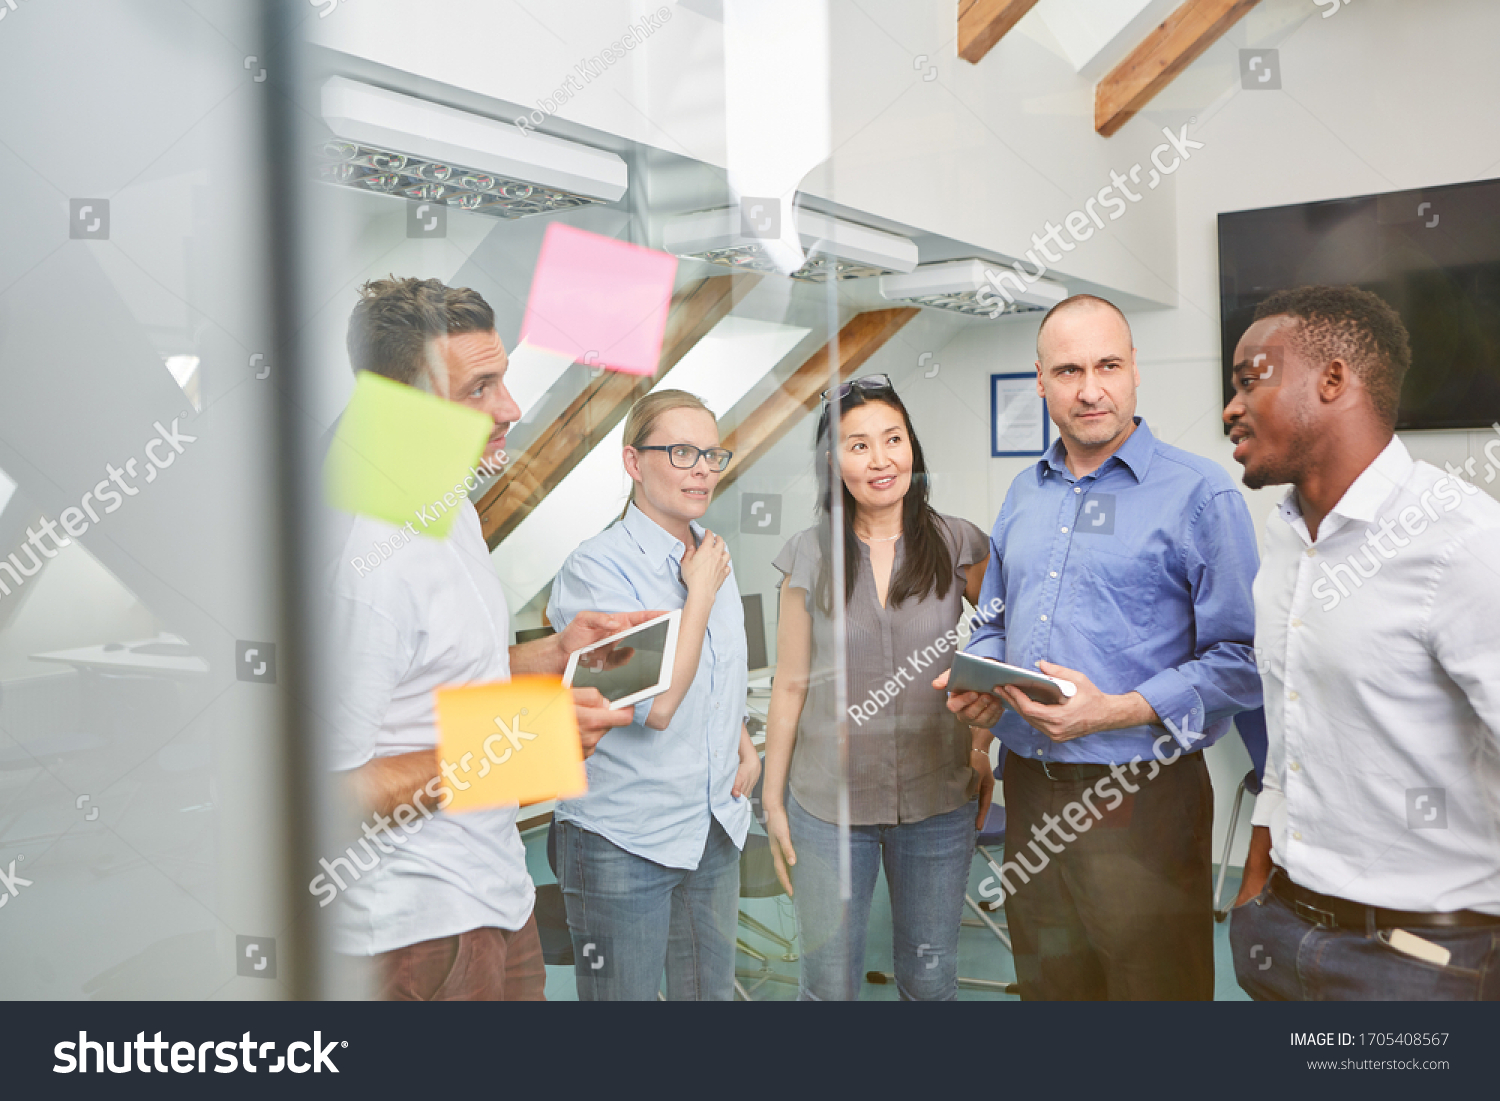 Multicultural business team in a meeting or brainstorming in the office #1705408567